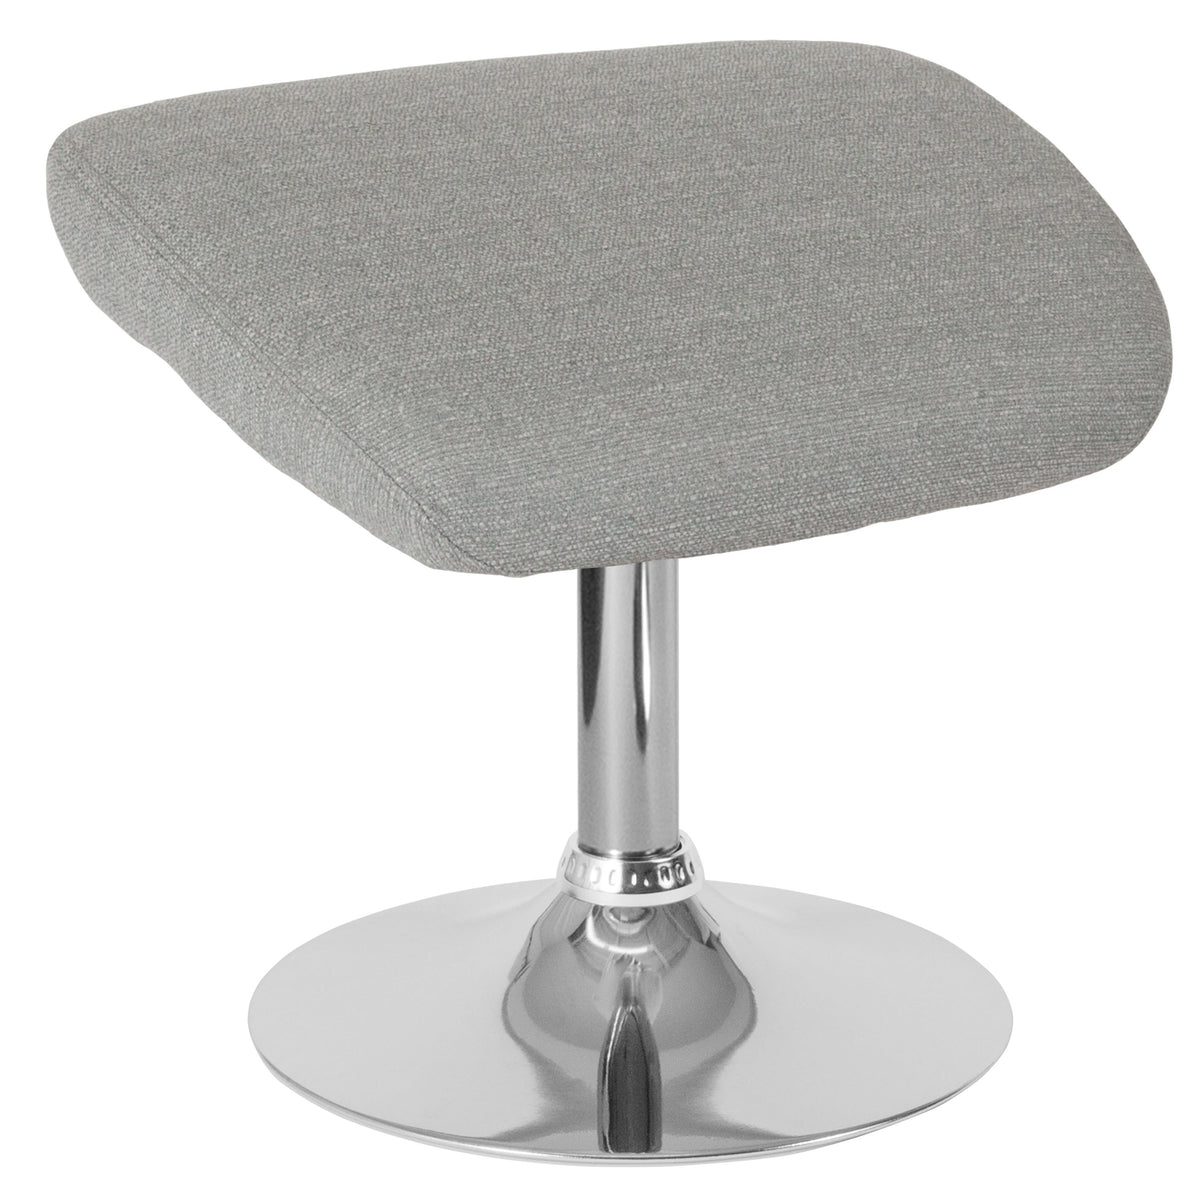 Light Gray Fabric |#| Light Gray Fabric Ottoman Footrest with Chrome Base - Living Room Furniture